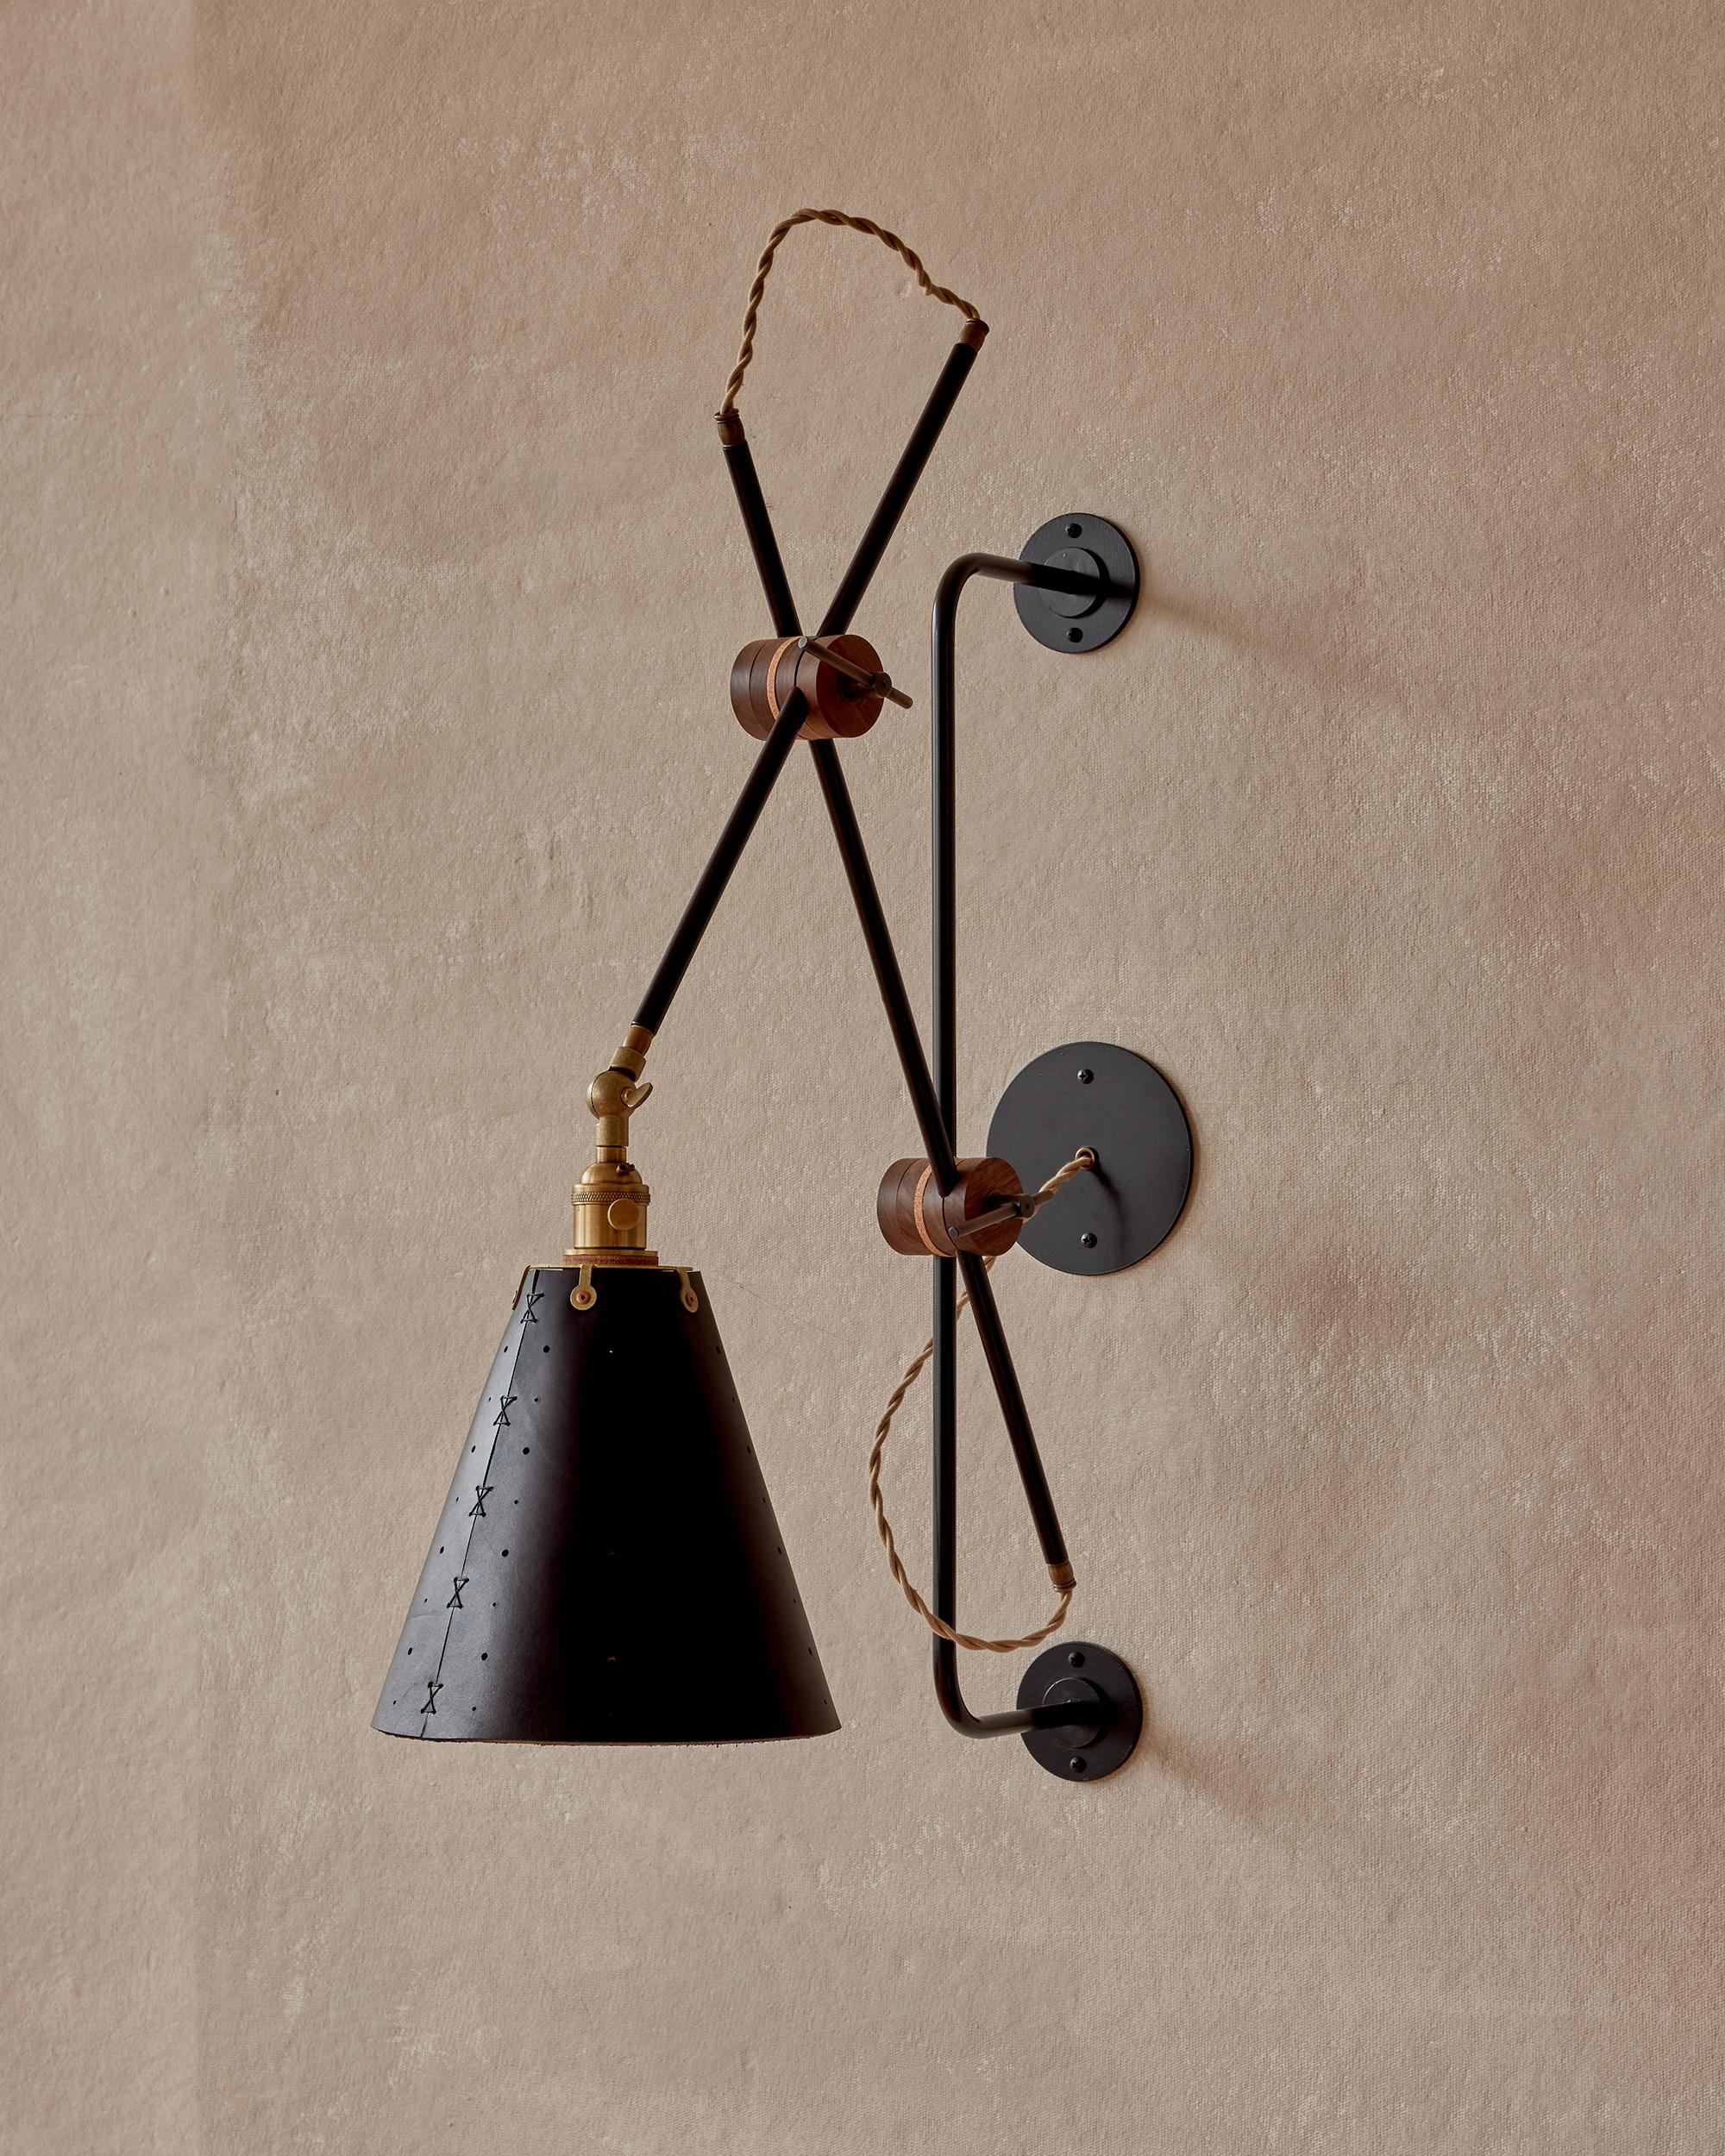 Celebrated for its striking composition and versatility, the Grace Articulating Wall Sconce is a true hallmark of ingenuity in lighting design. As handsome as it is useful, this hardwired sconce connects two lengths of steel piping with a black